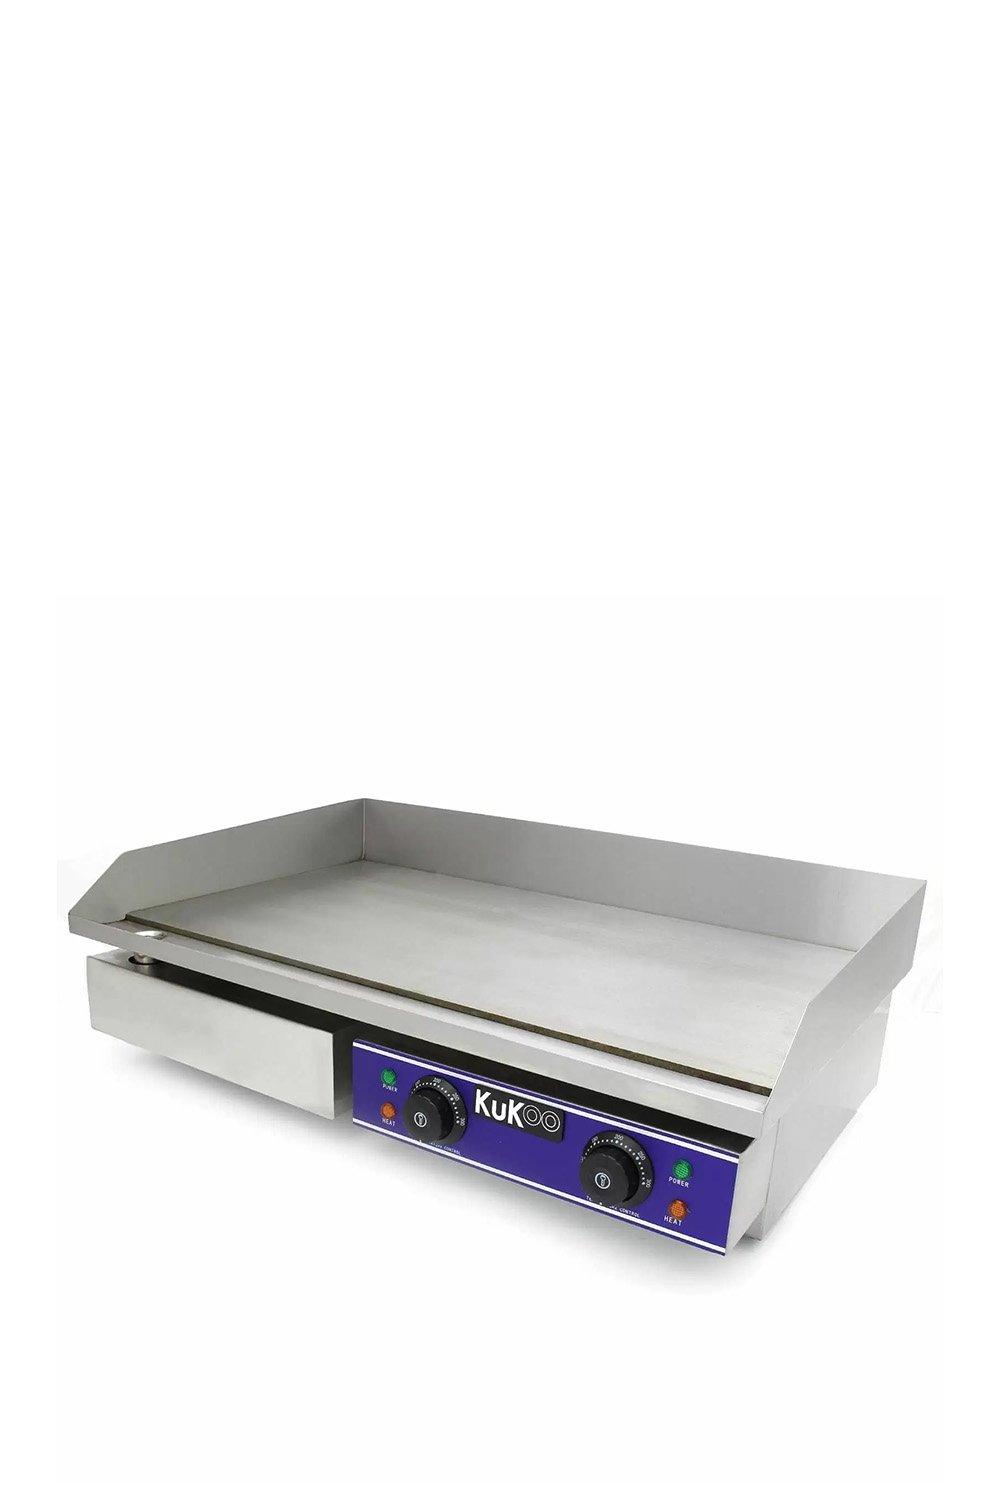 KuKoo 70cm Wide Electric Griddle